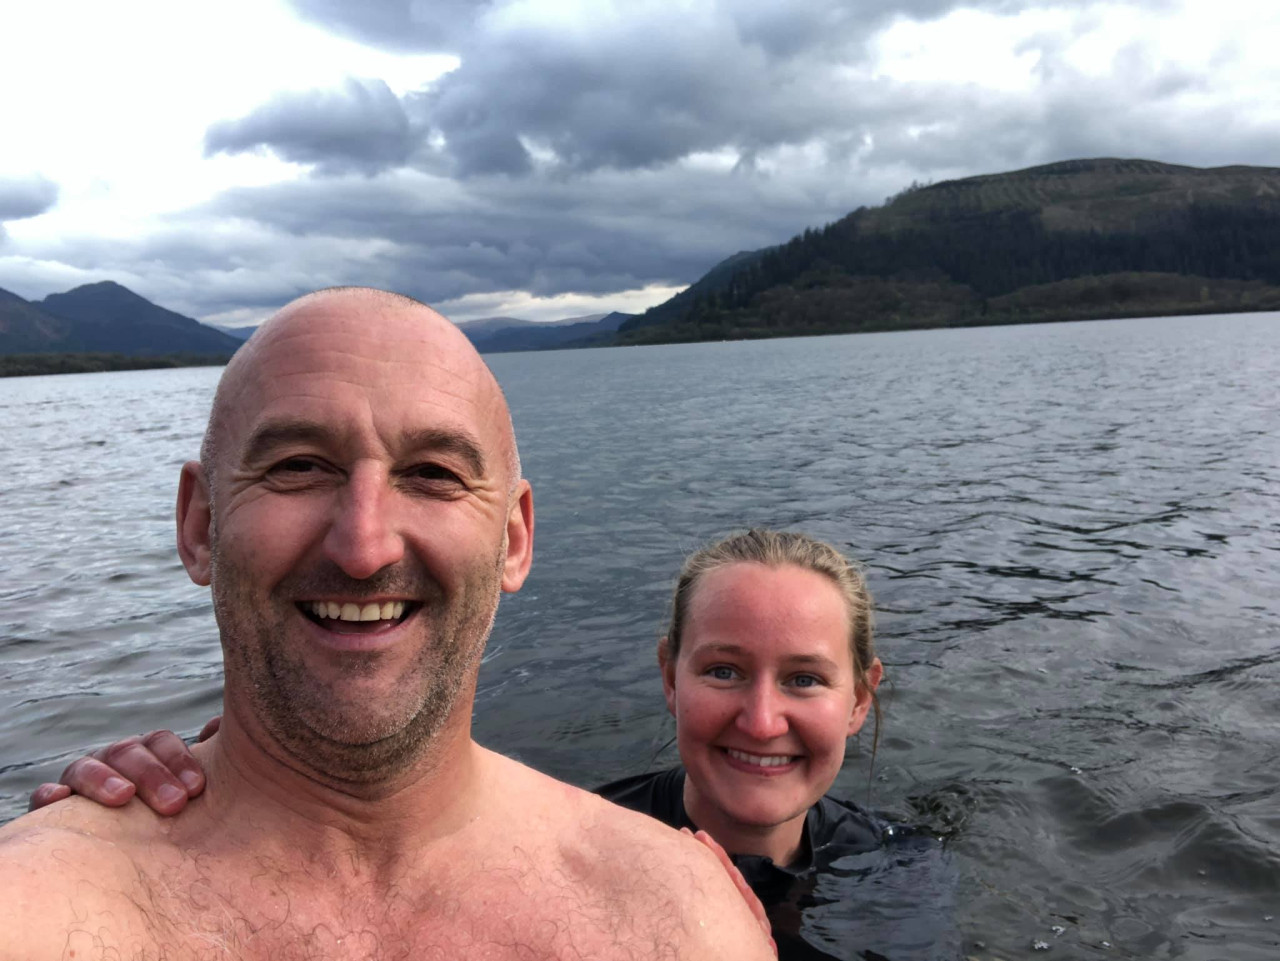 Becca and Lee from the Keswick Adventures team swimming in Derwentwater